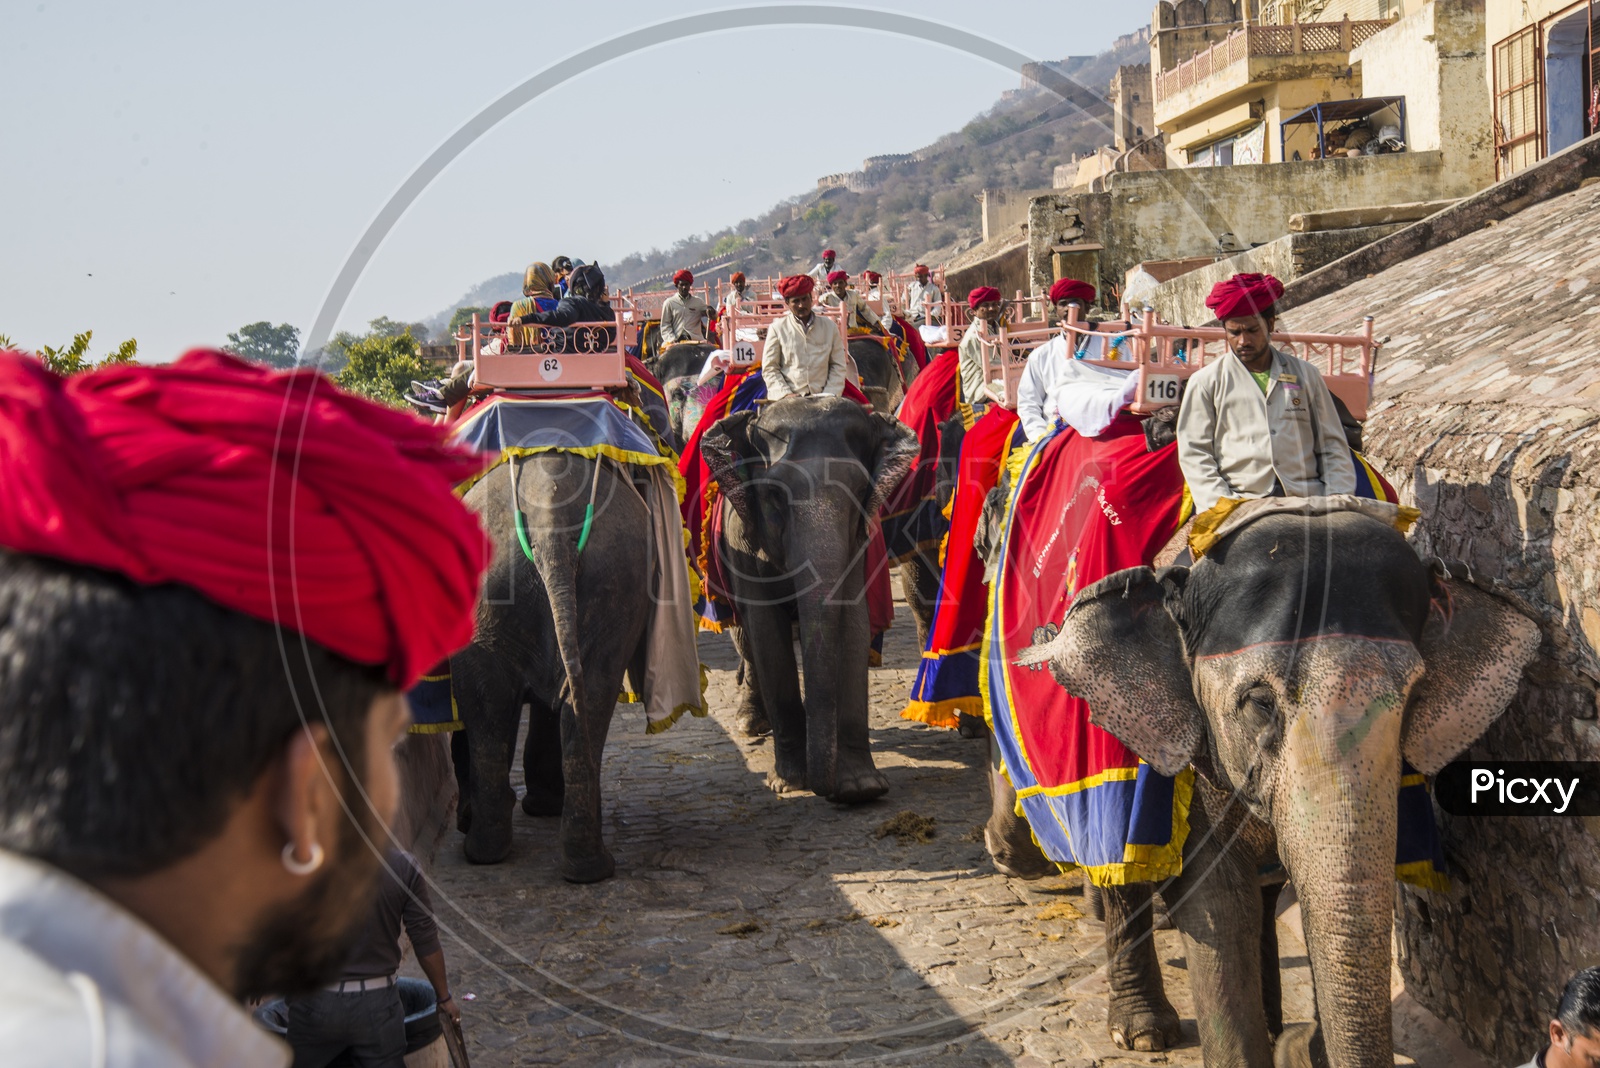 Elephant ride in Amer or Amber Fort, Jaipur